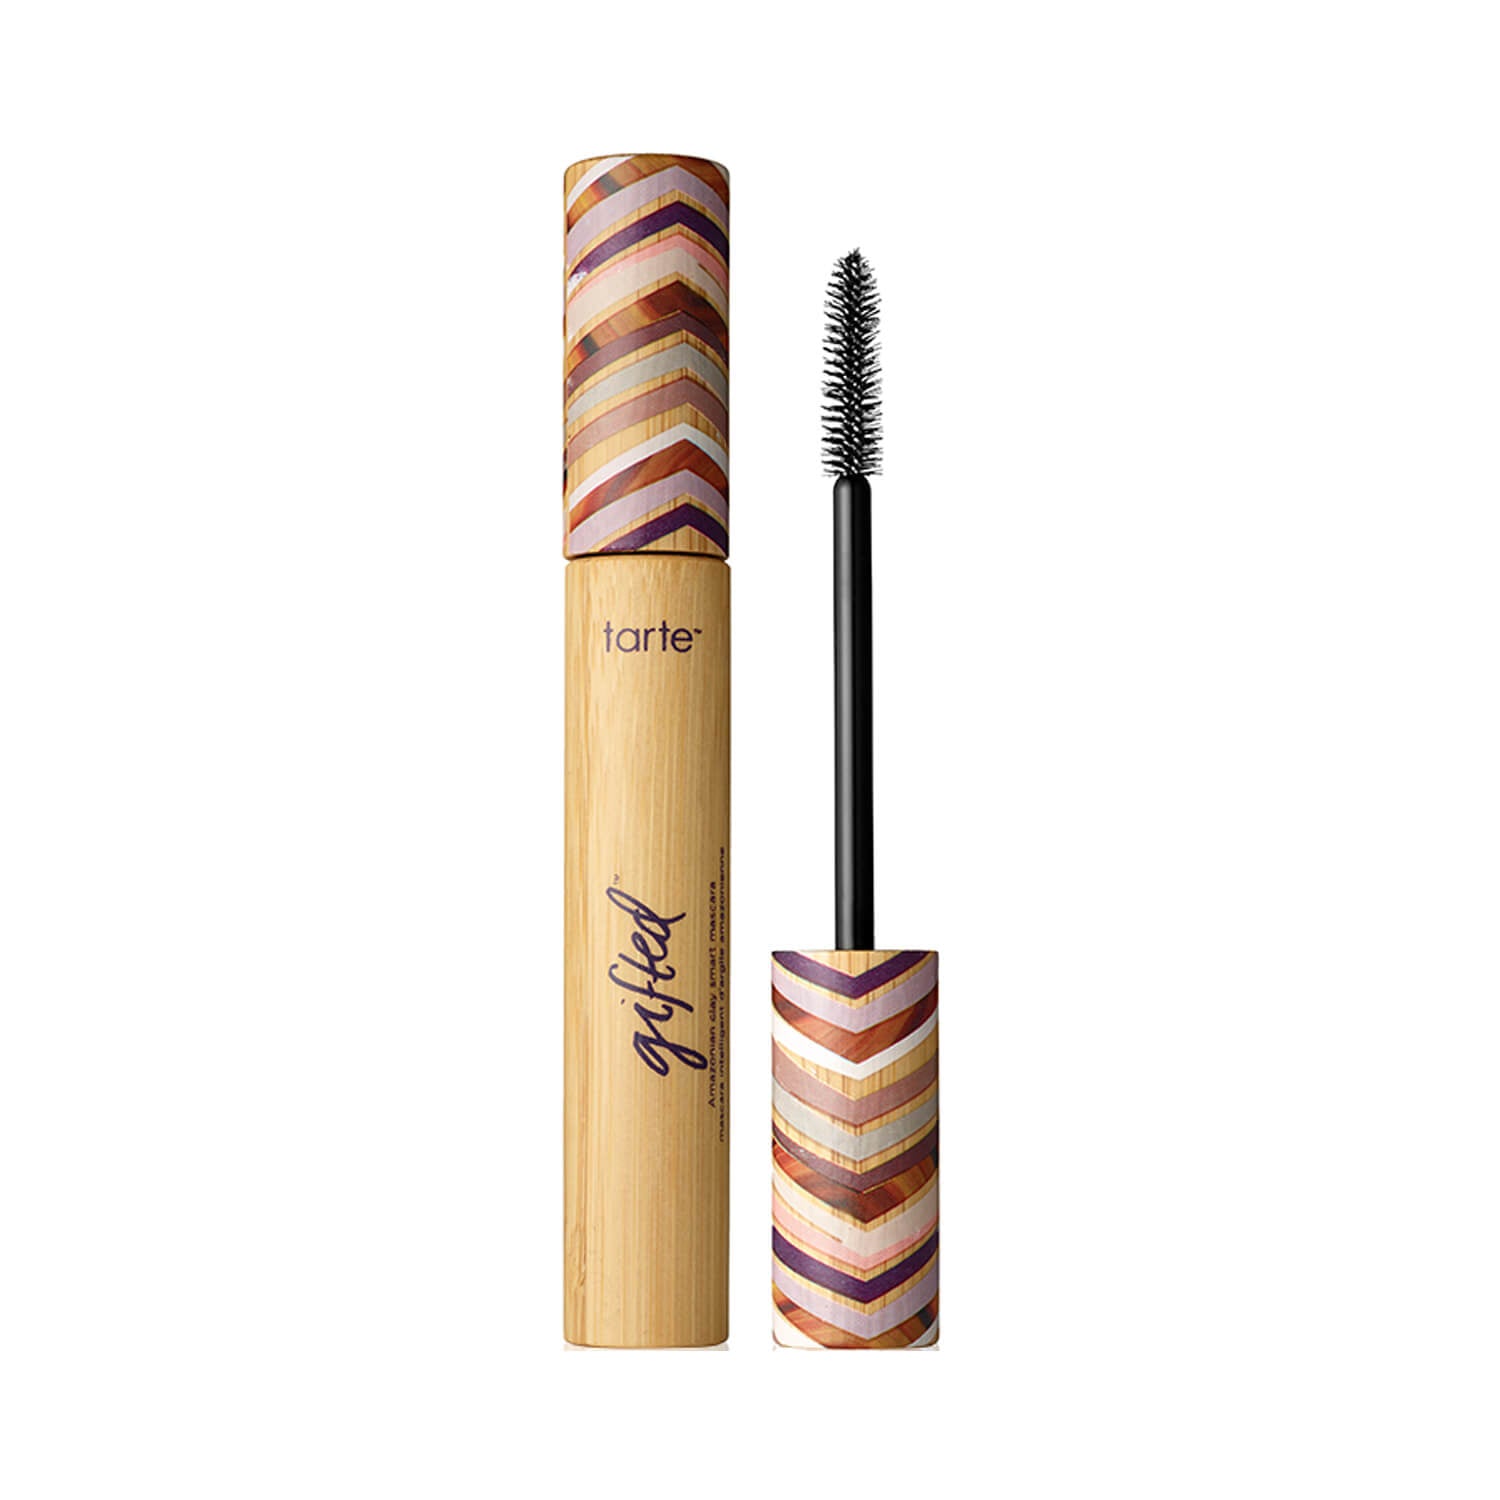 Tarte Limited Edition Gifted Amazonian Clay Smart Mascara